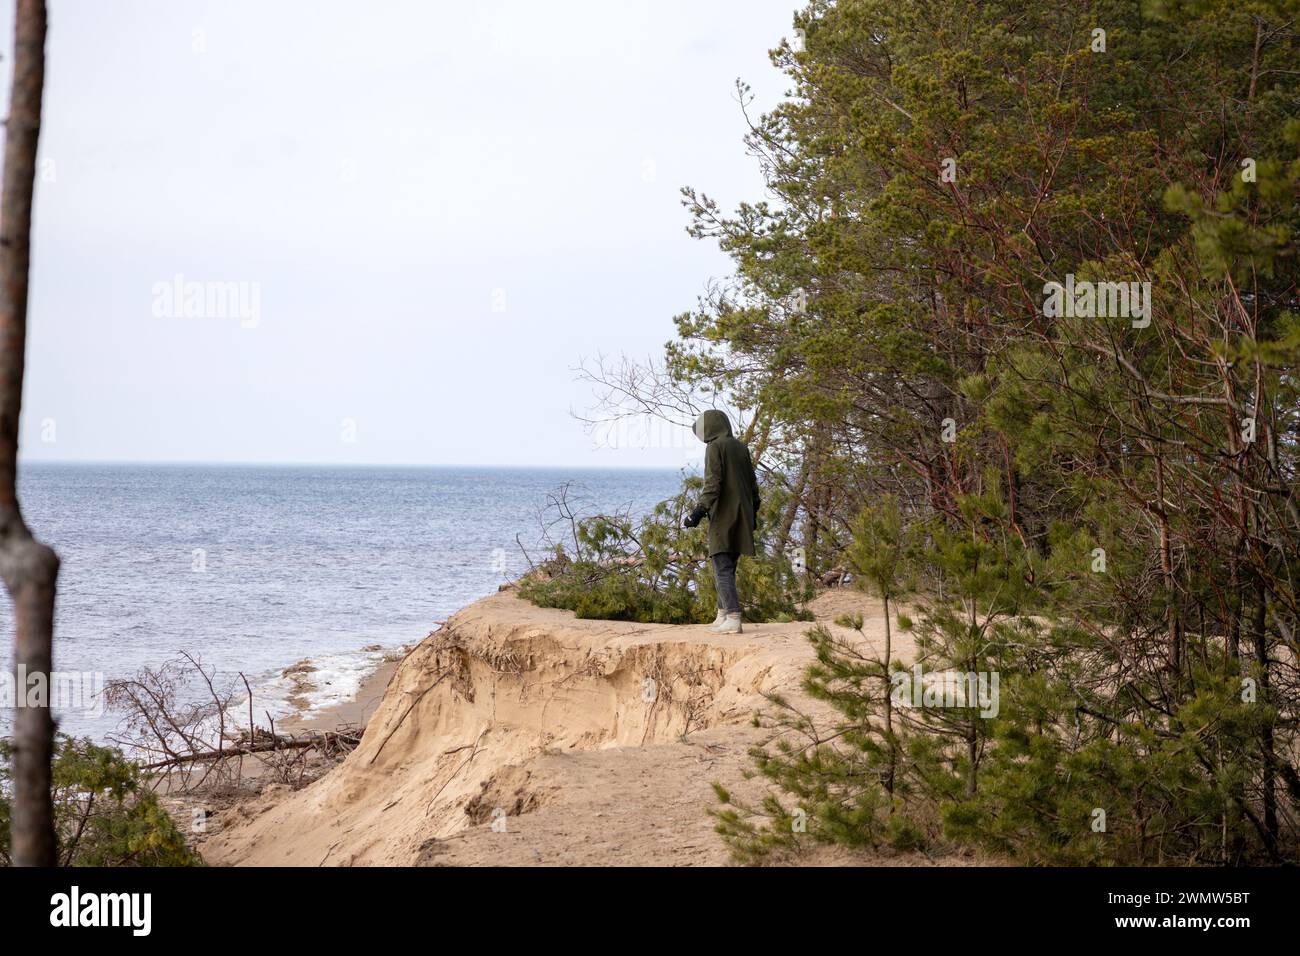 A person walks along the edge of a washed-out dune on the shore of the Baltic Sea with fallen trees in the water Stock Photo